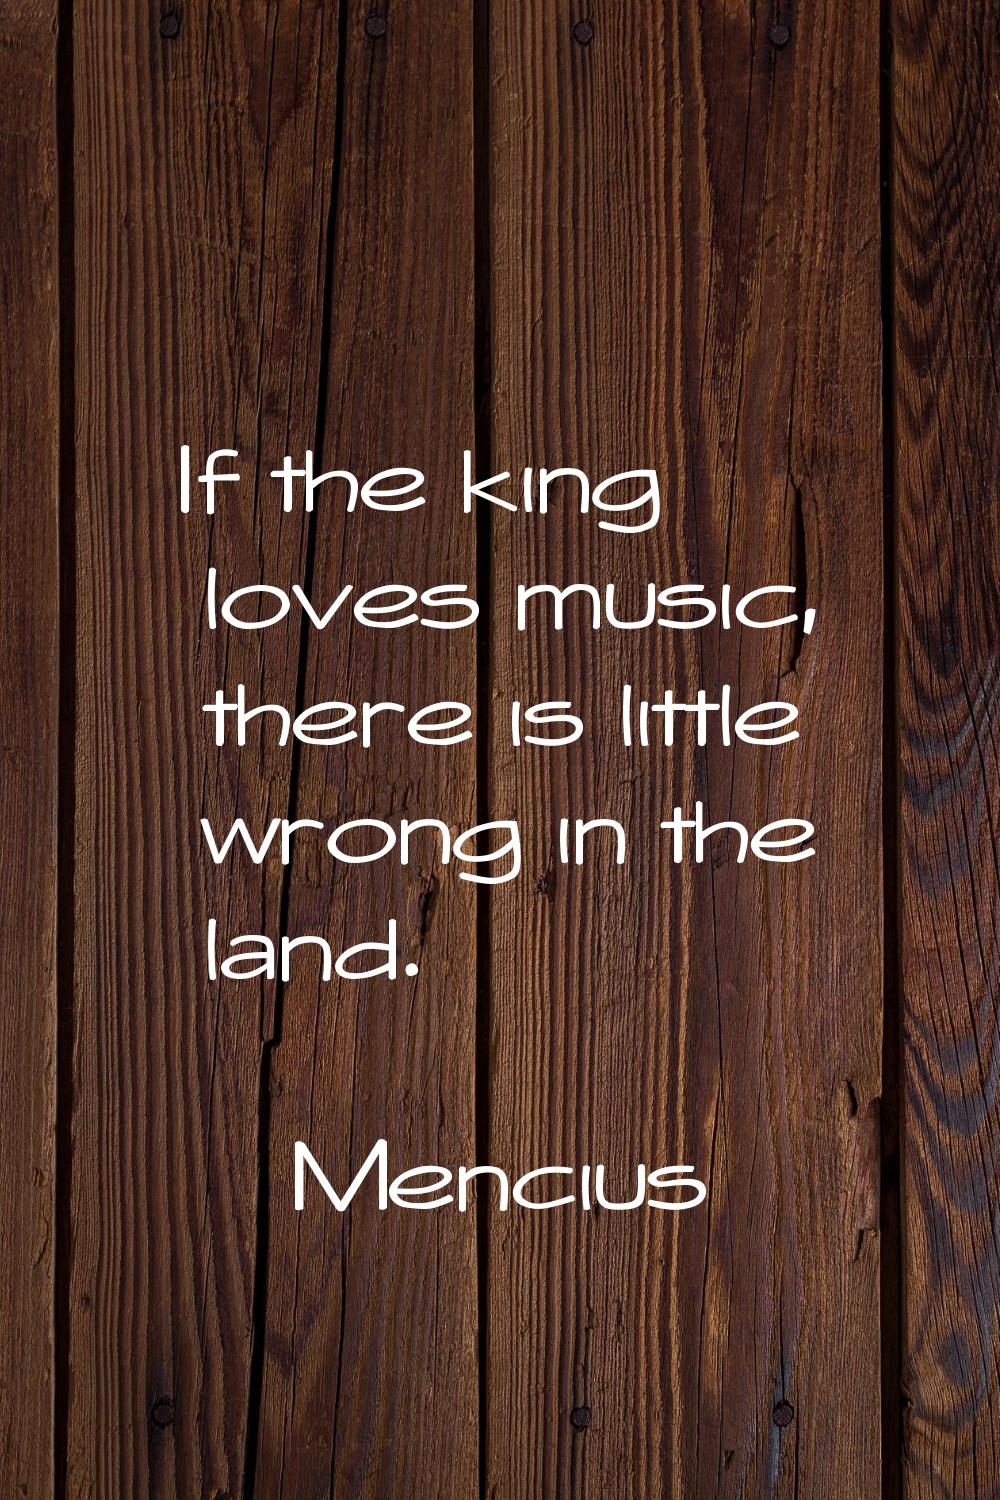 If the king loves music, there is little wrong in the land.